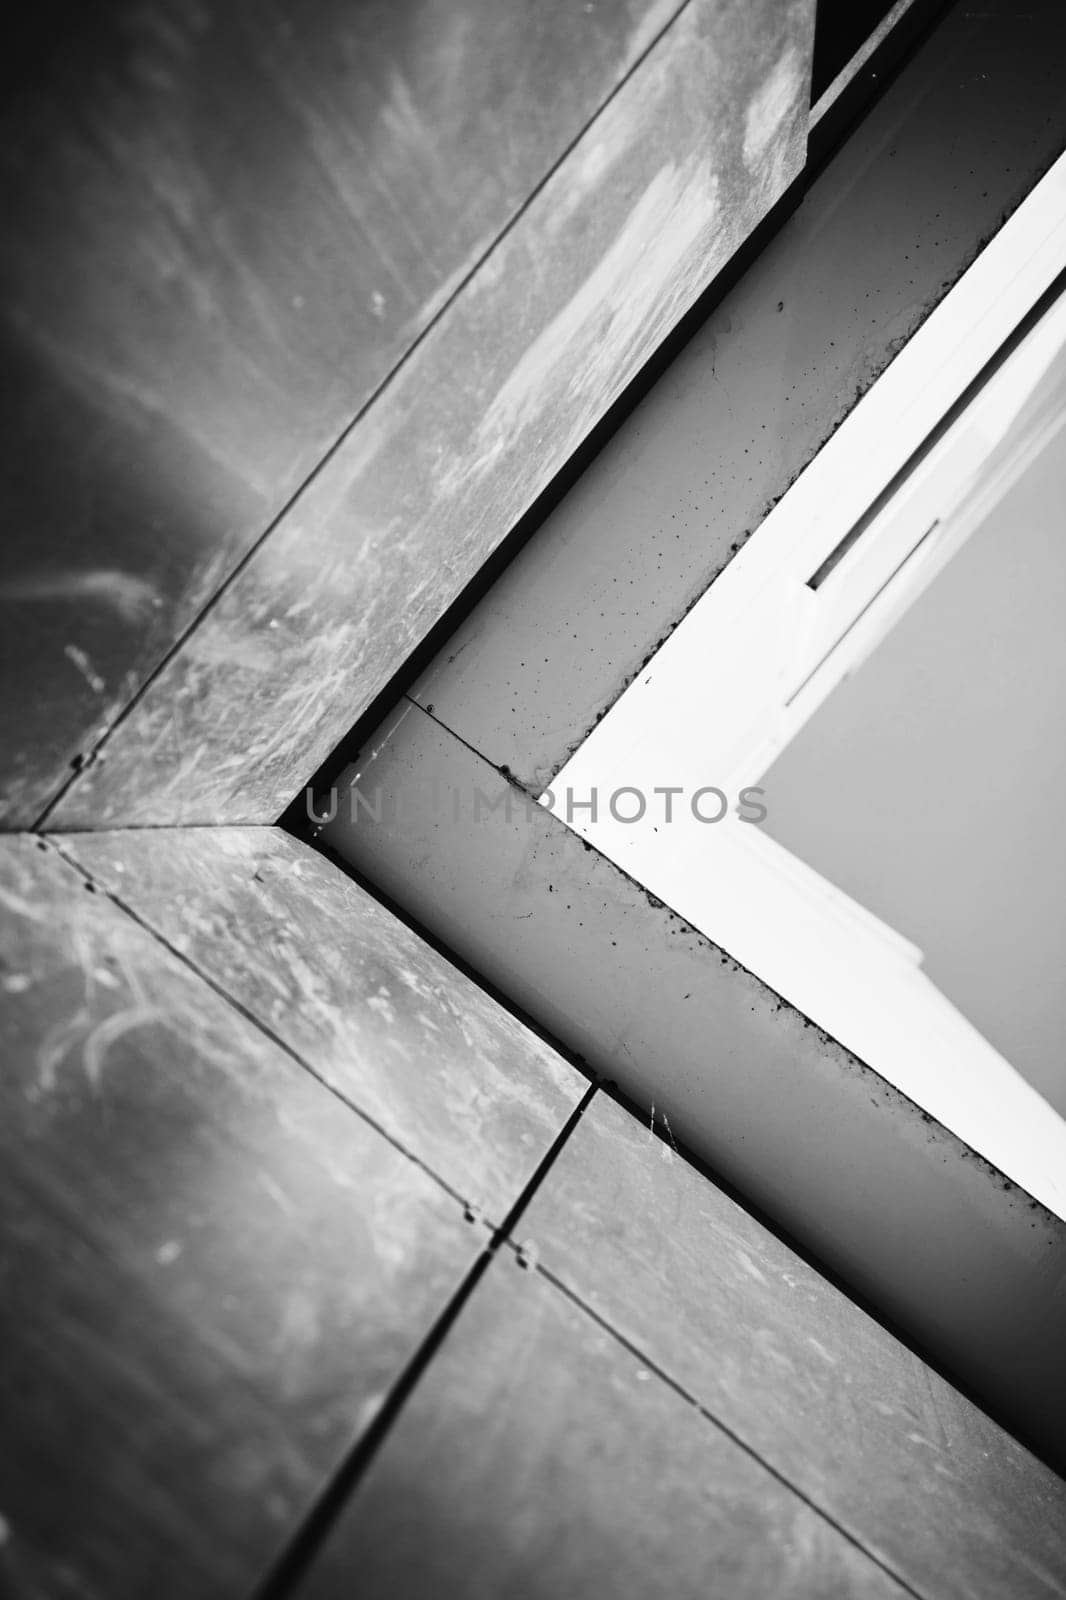 Black and white pictures of commercial buildings